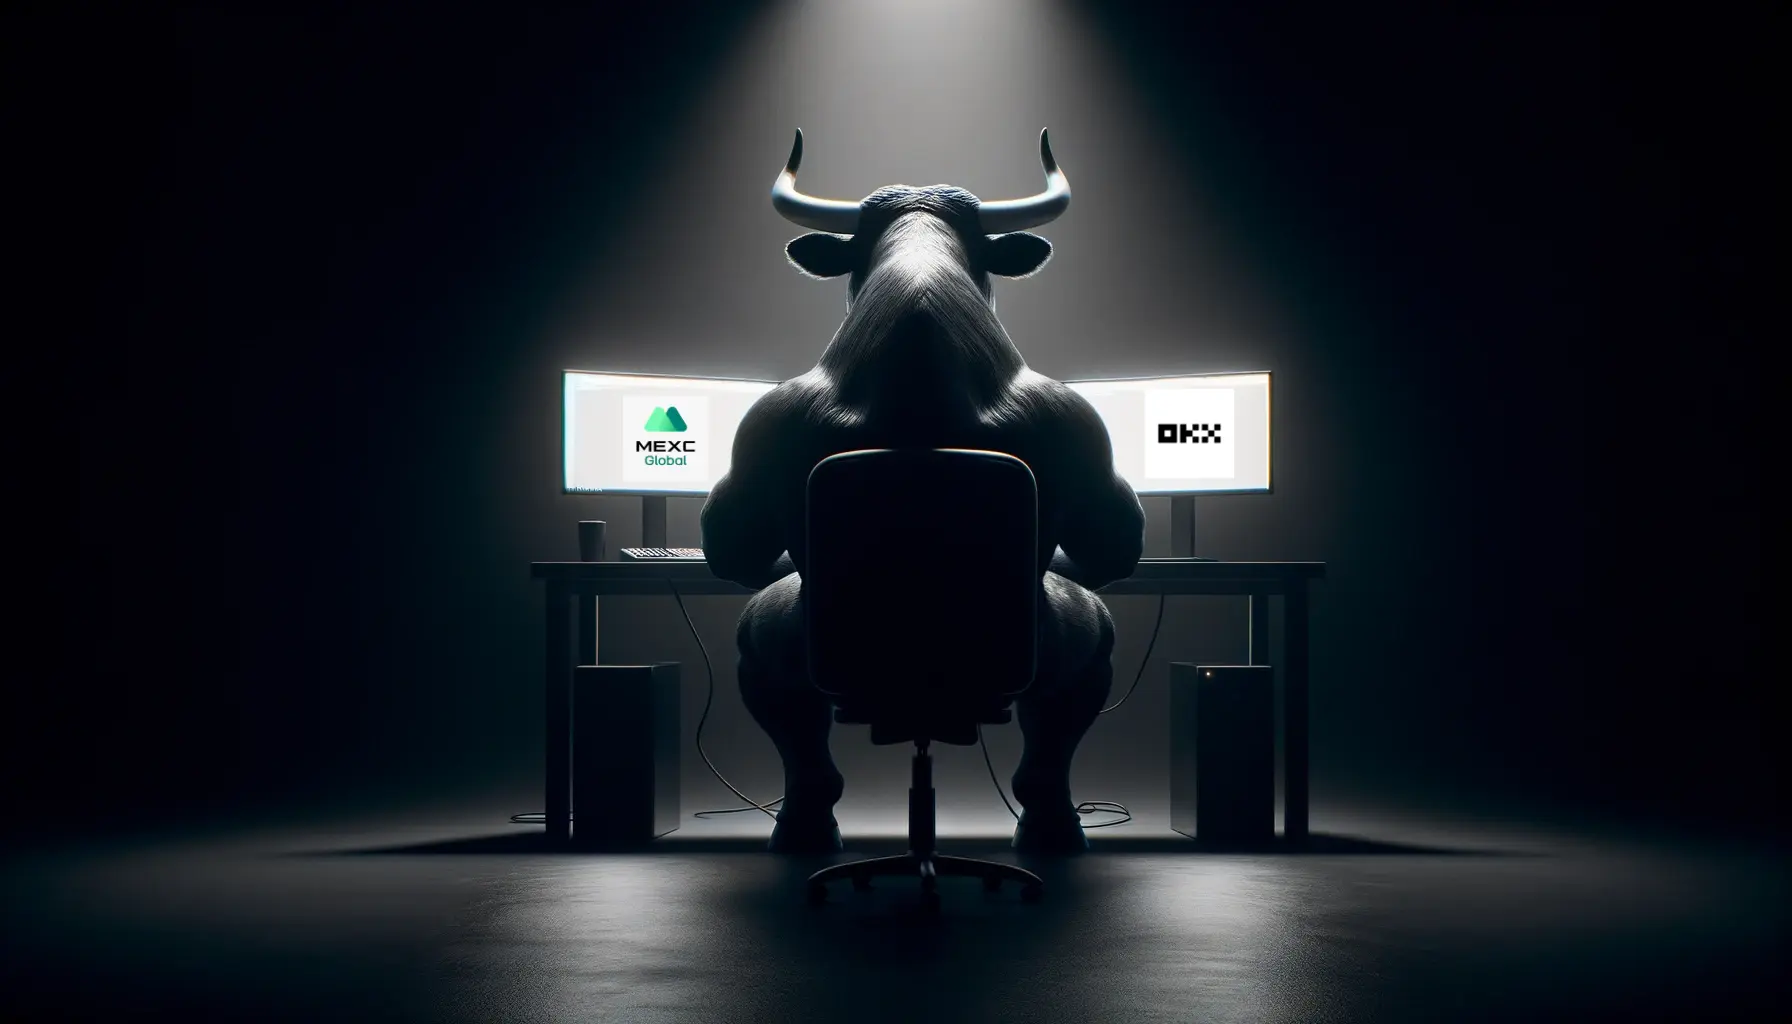 Bull at a modern workstation with dual monitors, comparing MEXC vs OKX. embodying financial market strength.